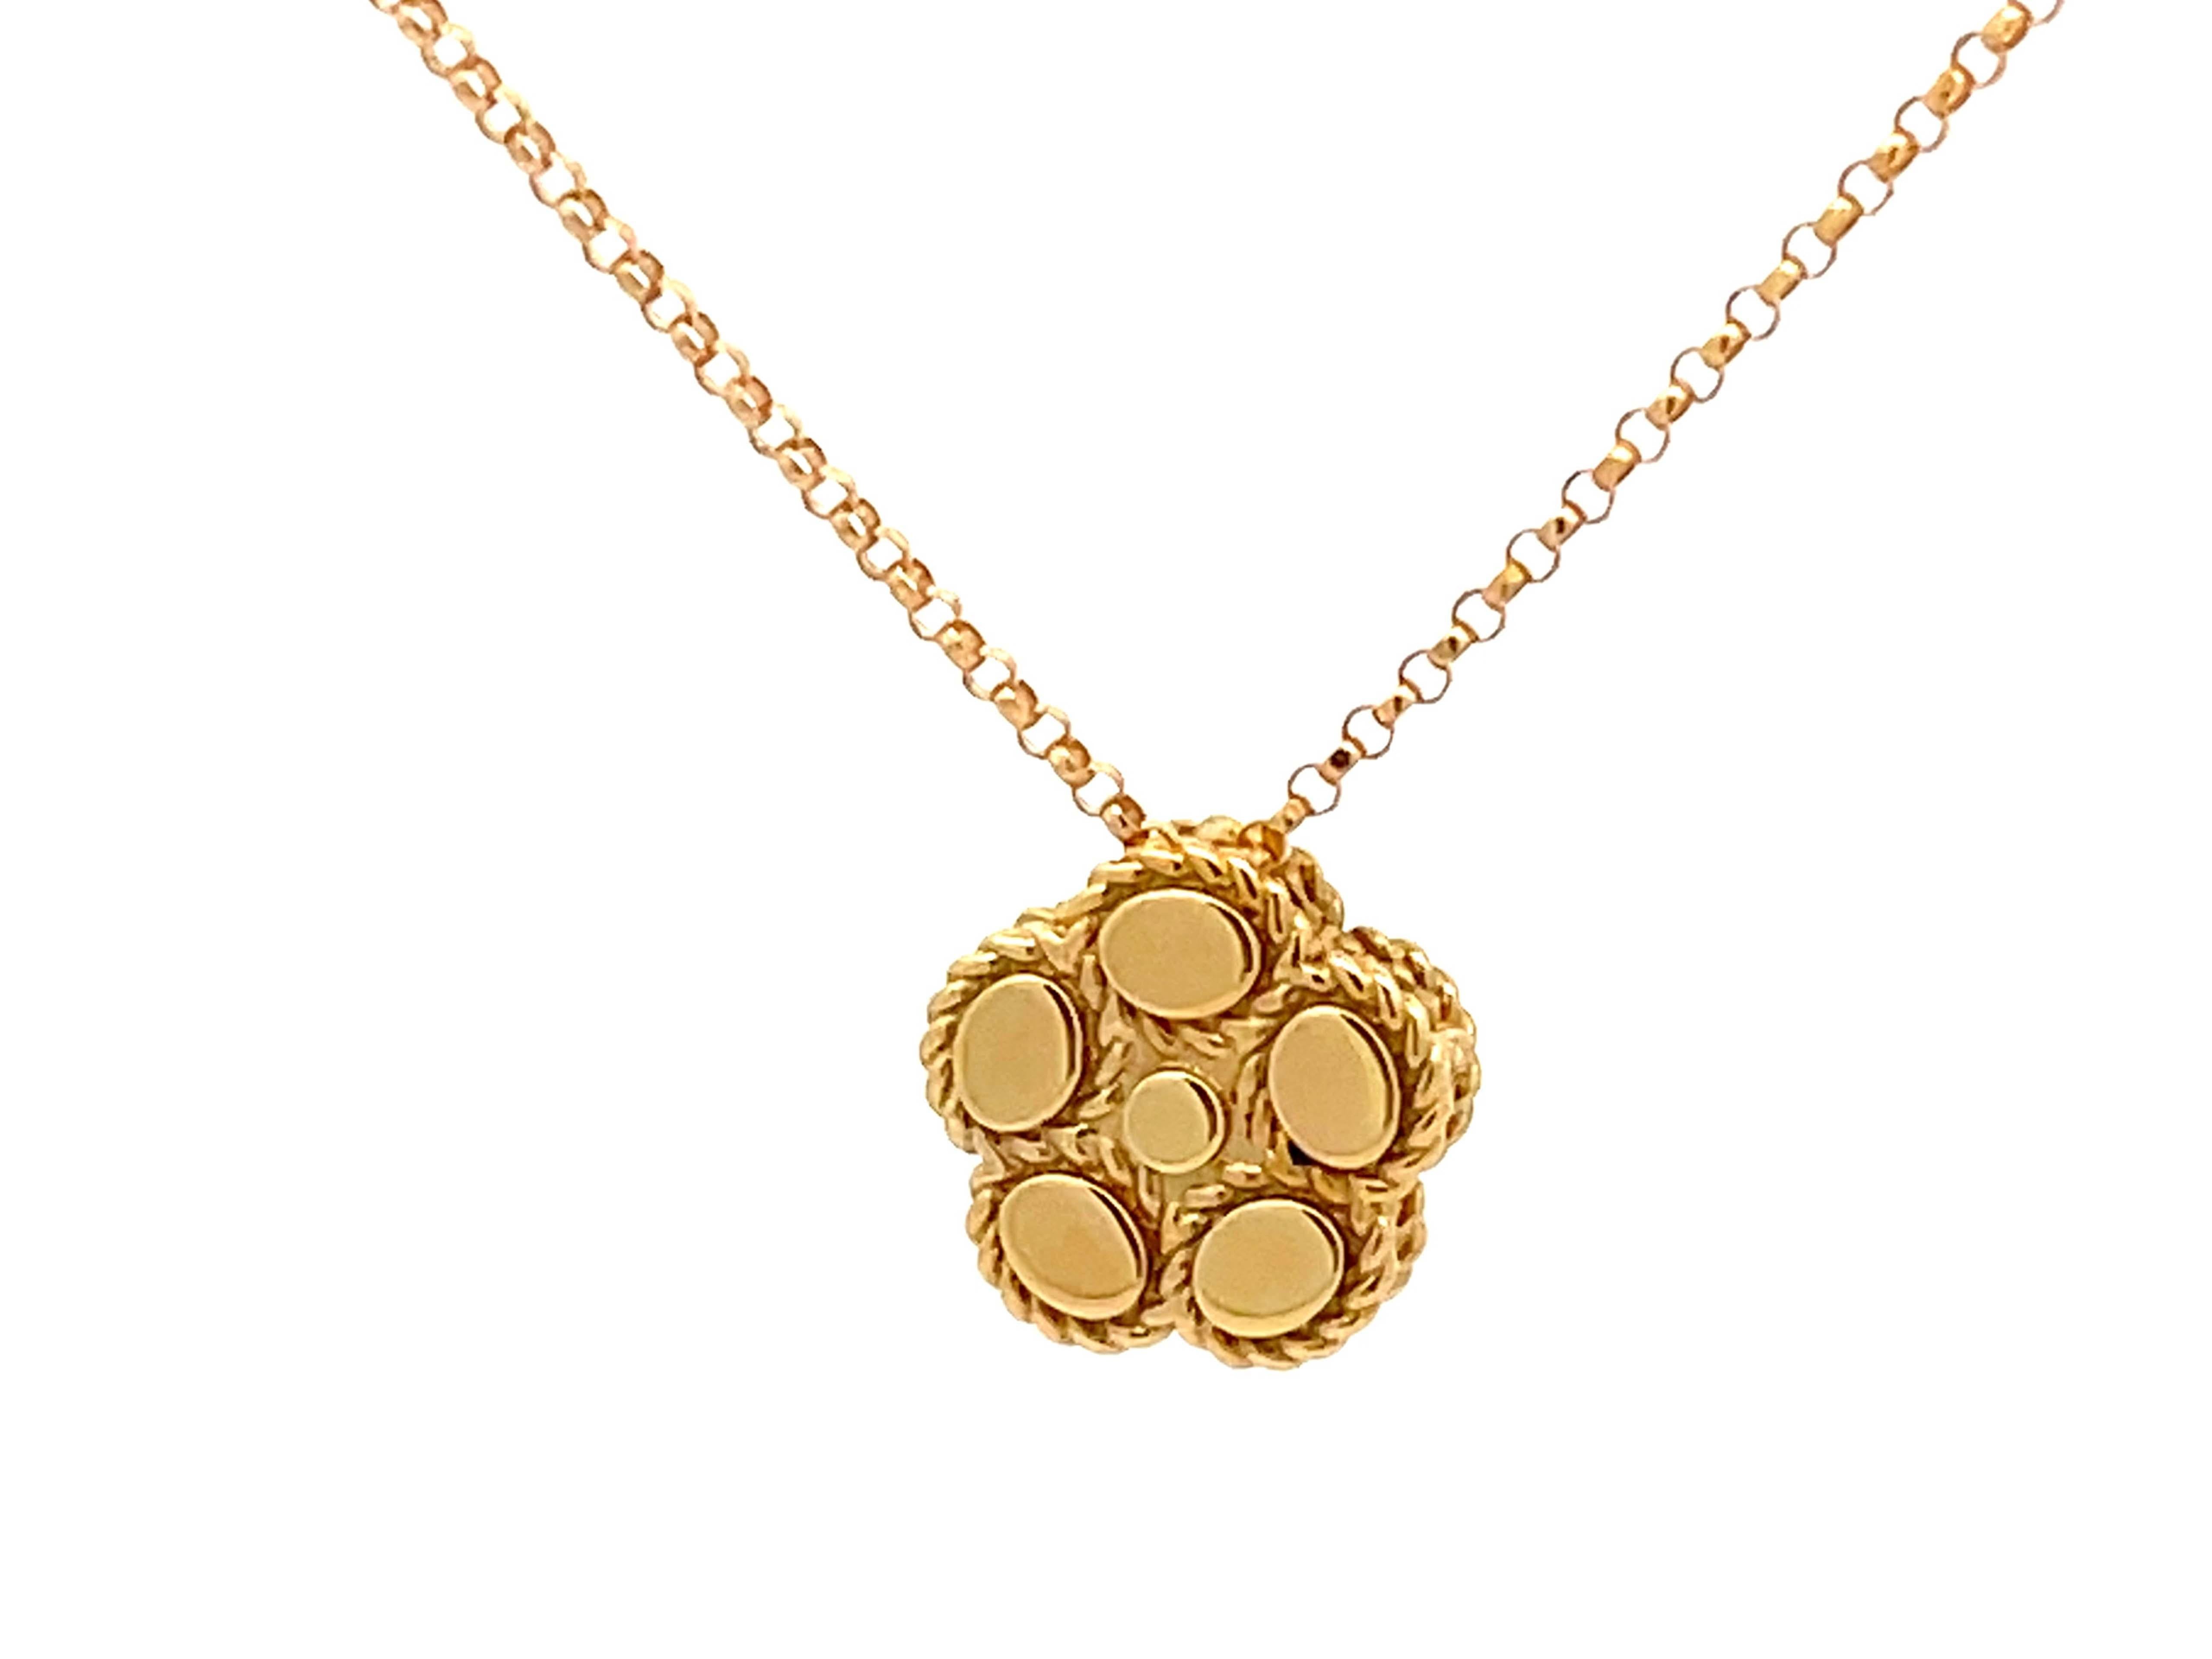 Roberto Coin Diamond Daisy Necklace in 18K Yellow Gold In Excellent Condition For Sale In Honolulu, HI